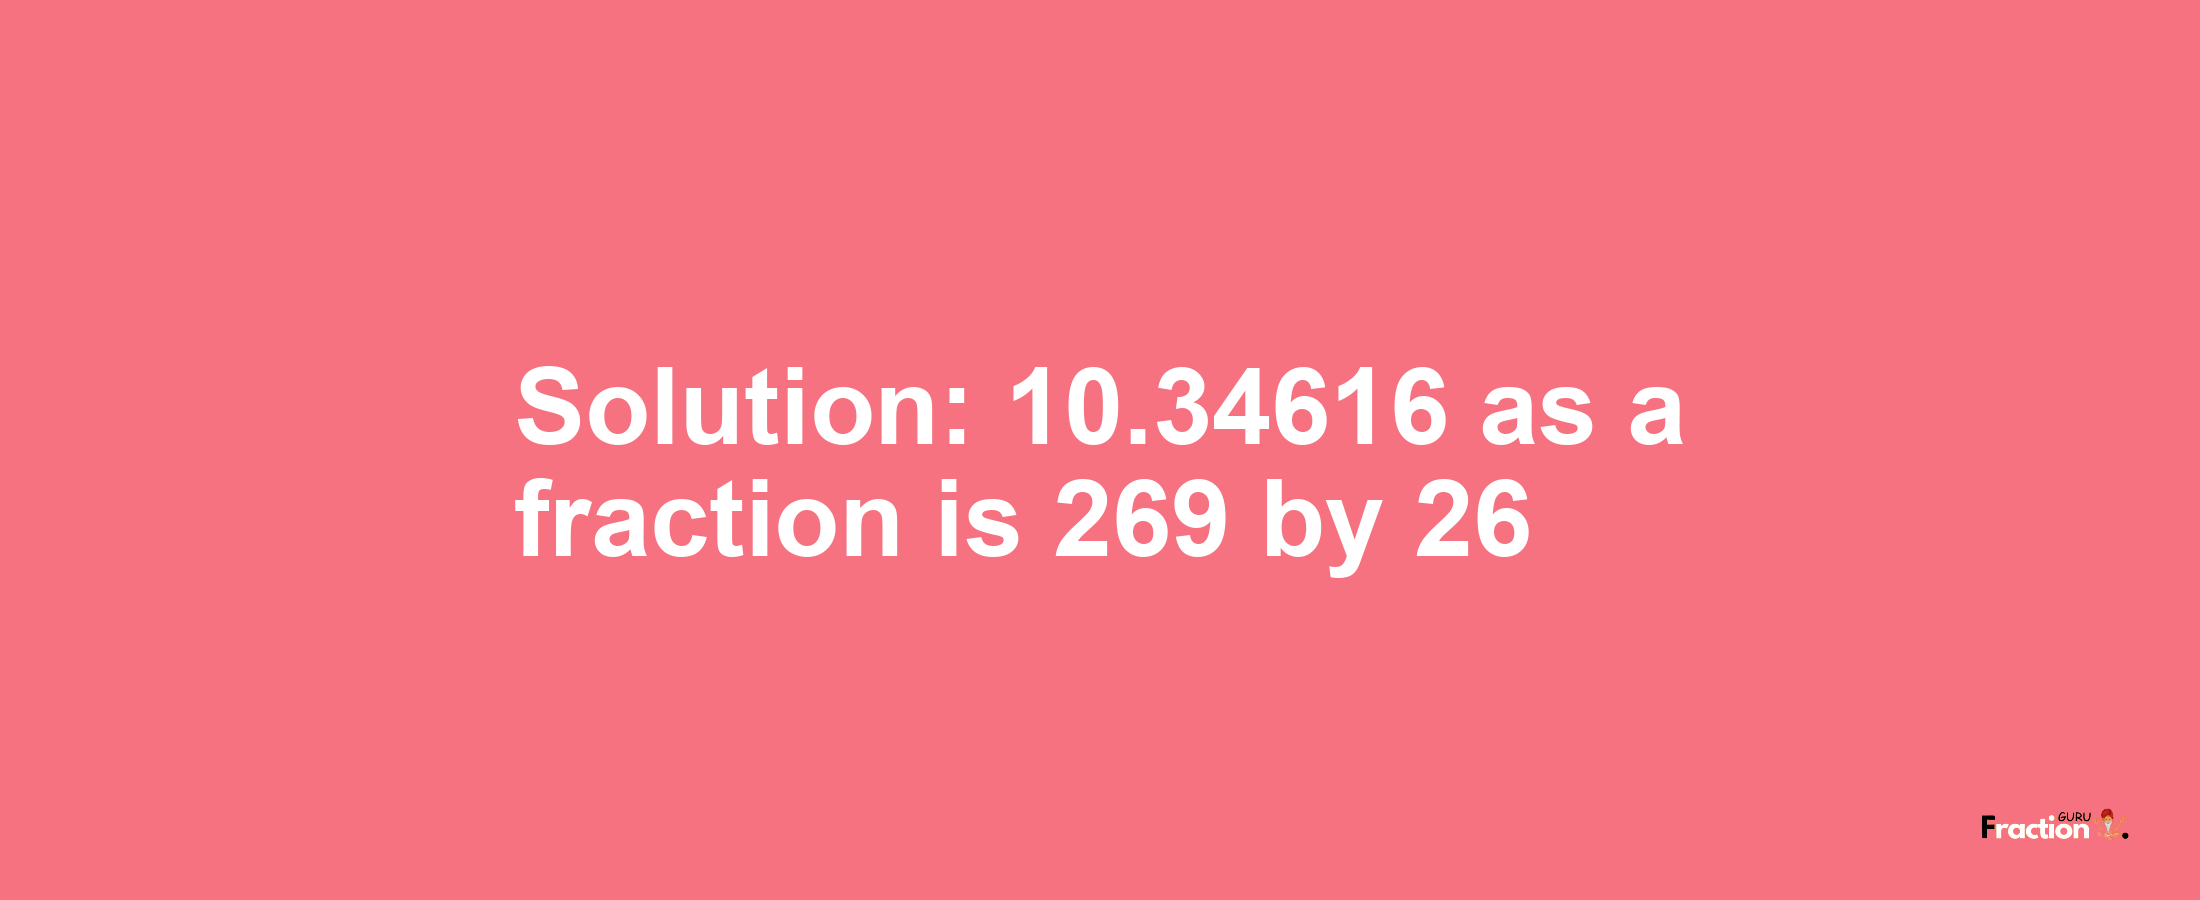 Solution:10.34616 as a fraction is 269/26